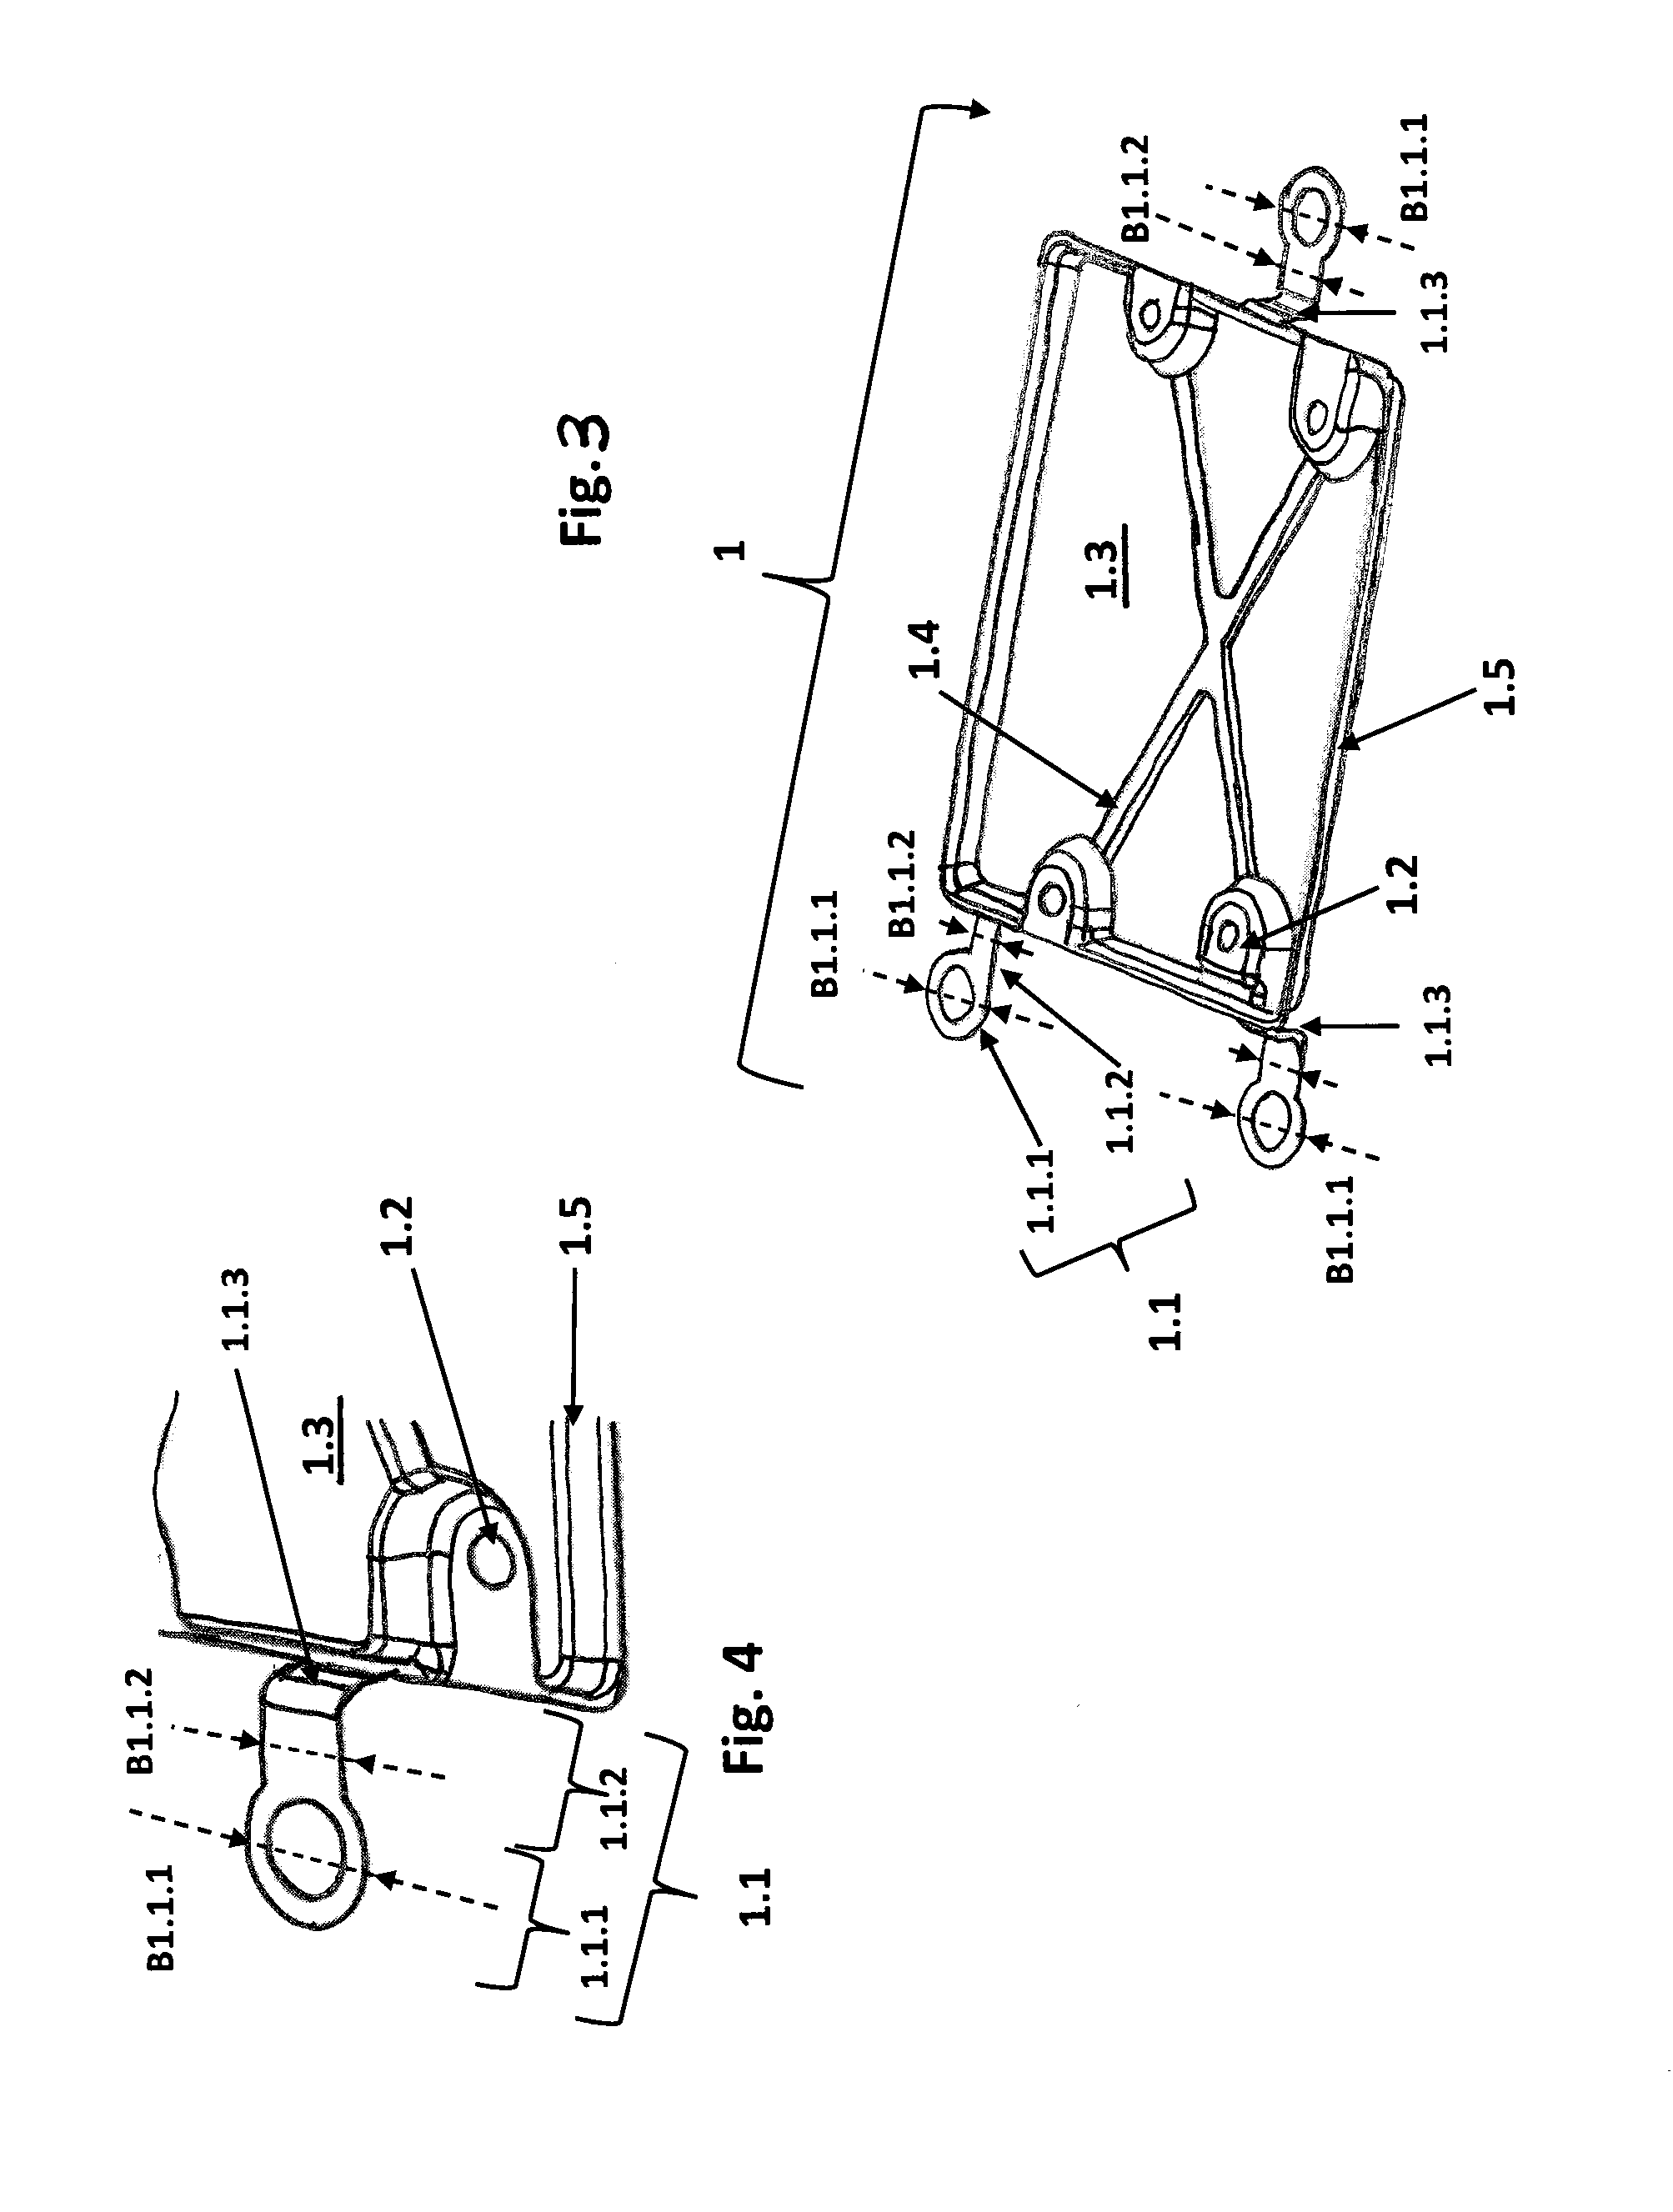 Electronic Assembly with a Housing Having a Plastic Part and a Metal Part